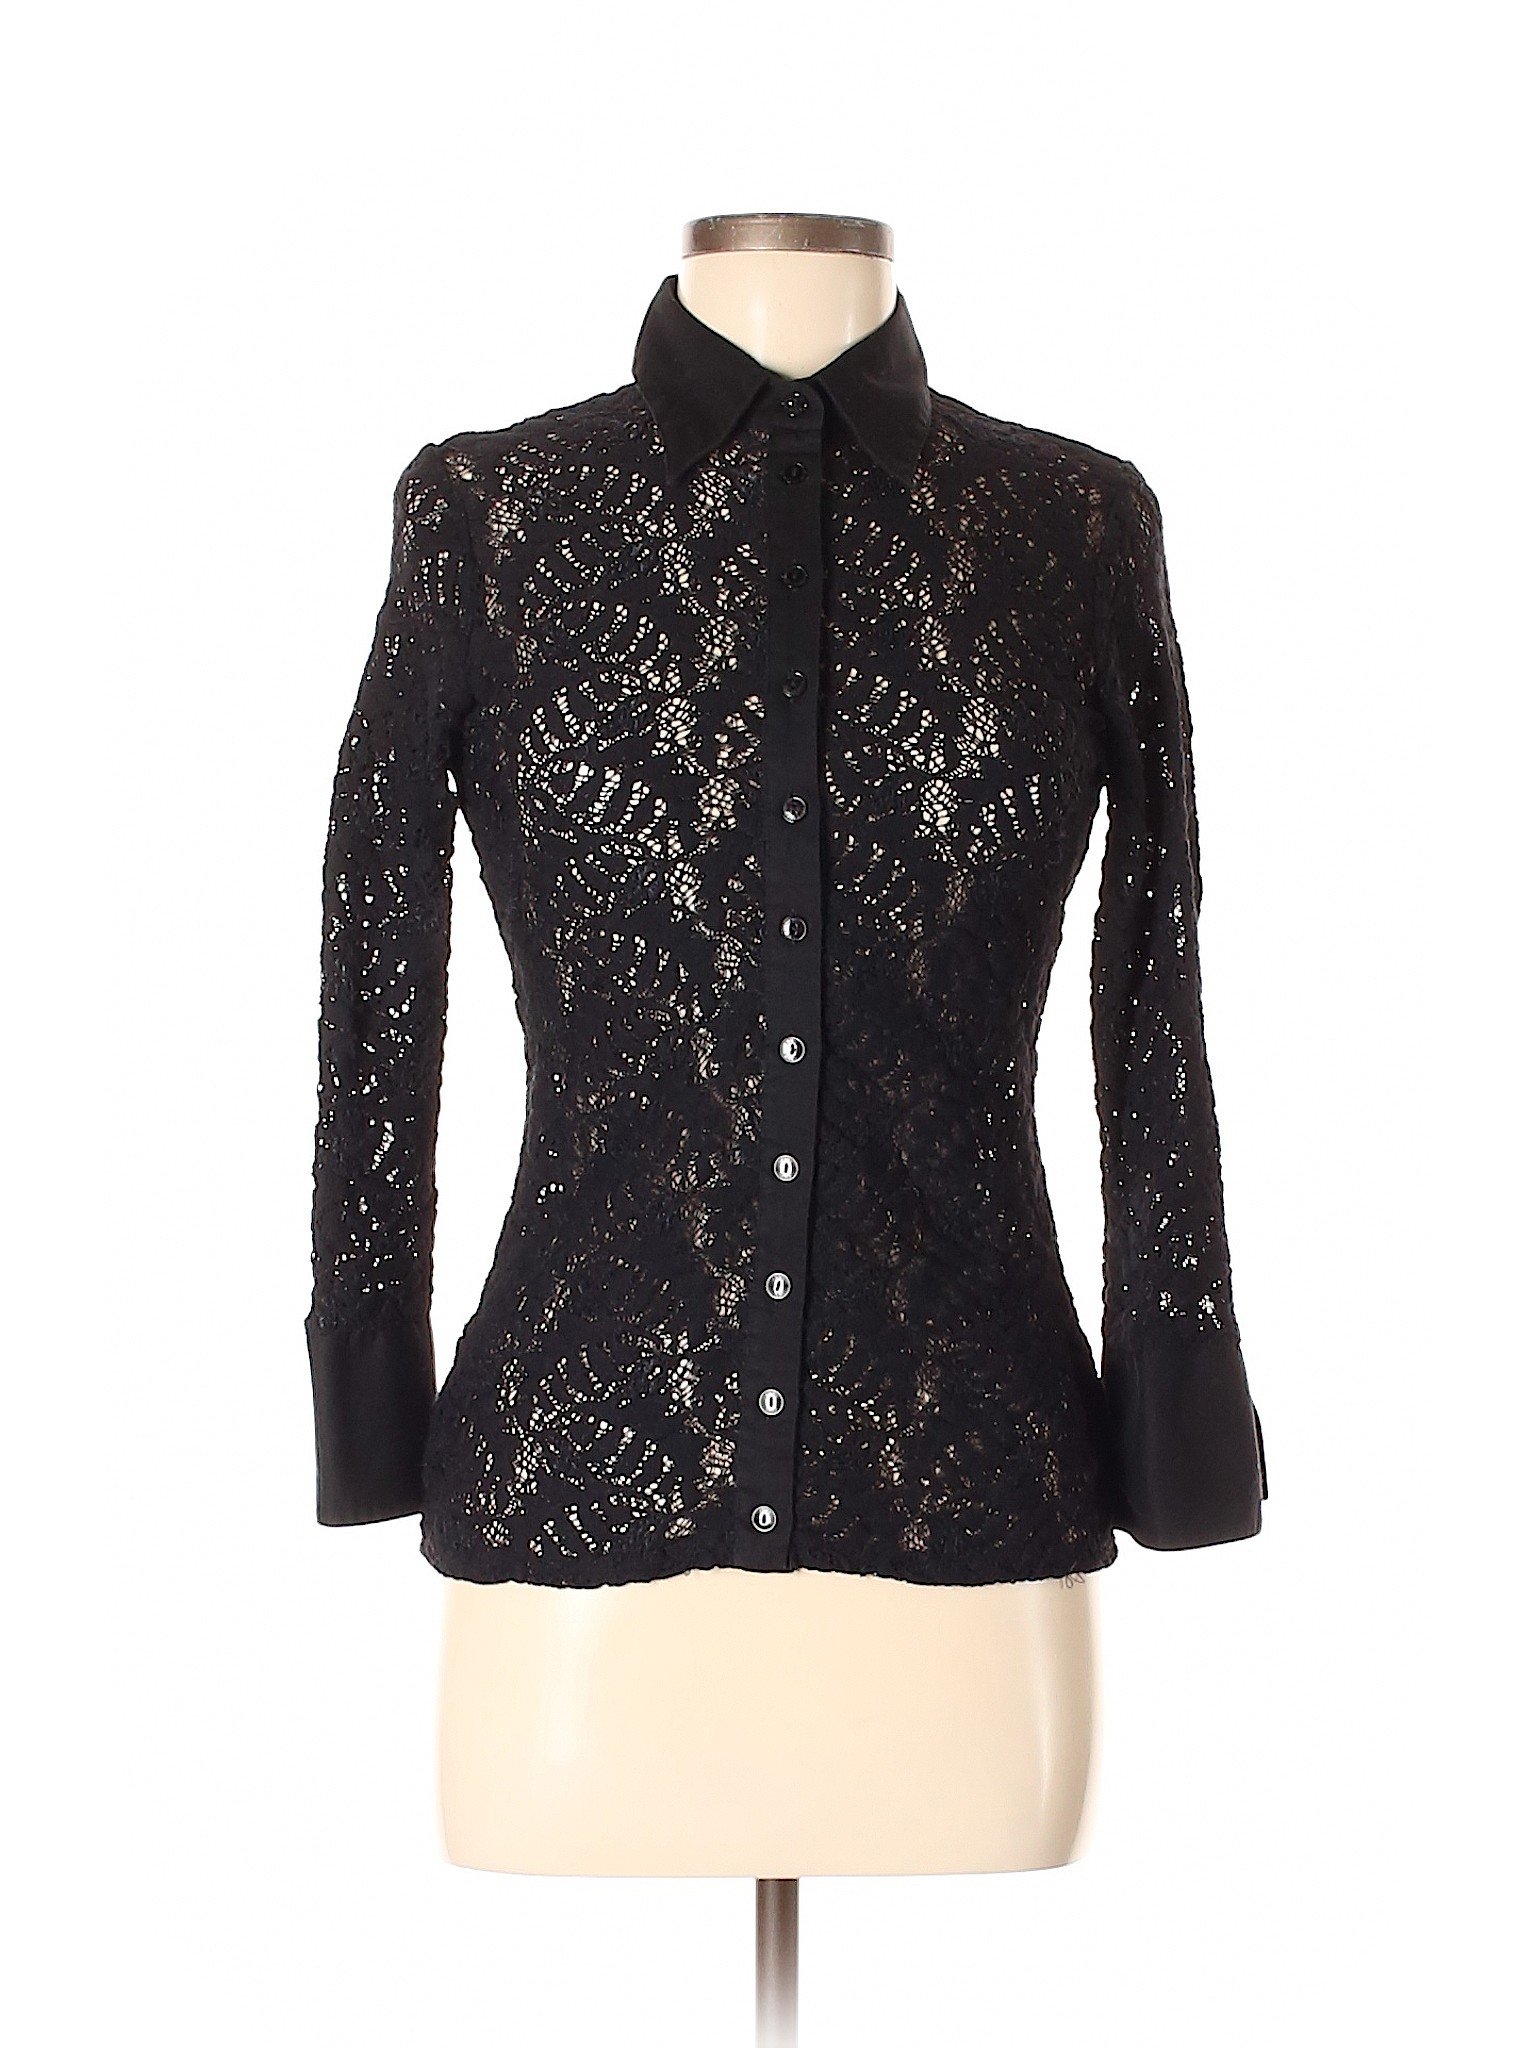 Anne Fontaine Lace Black Long Sleeve Button-Down Shirt Size 8 (40) - 86 ...